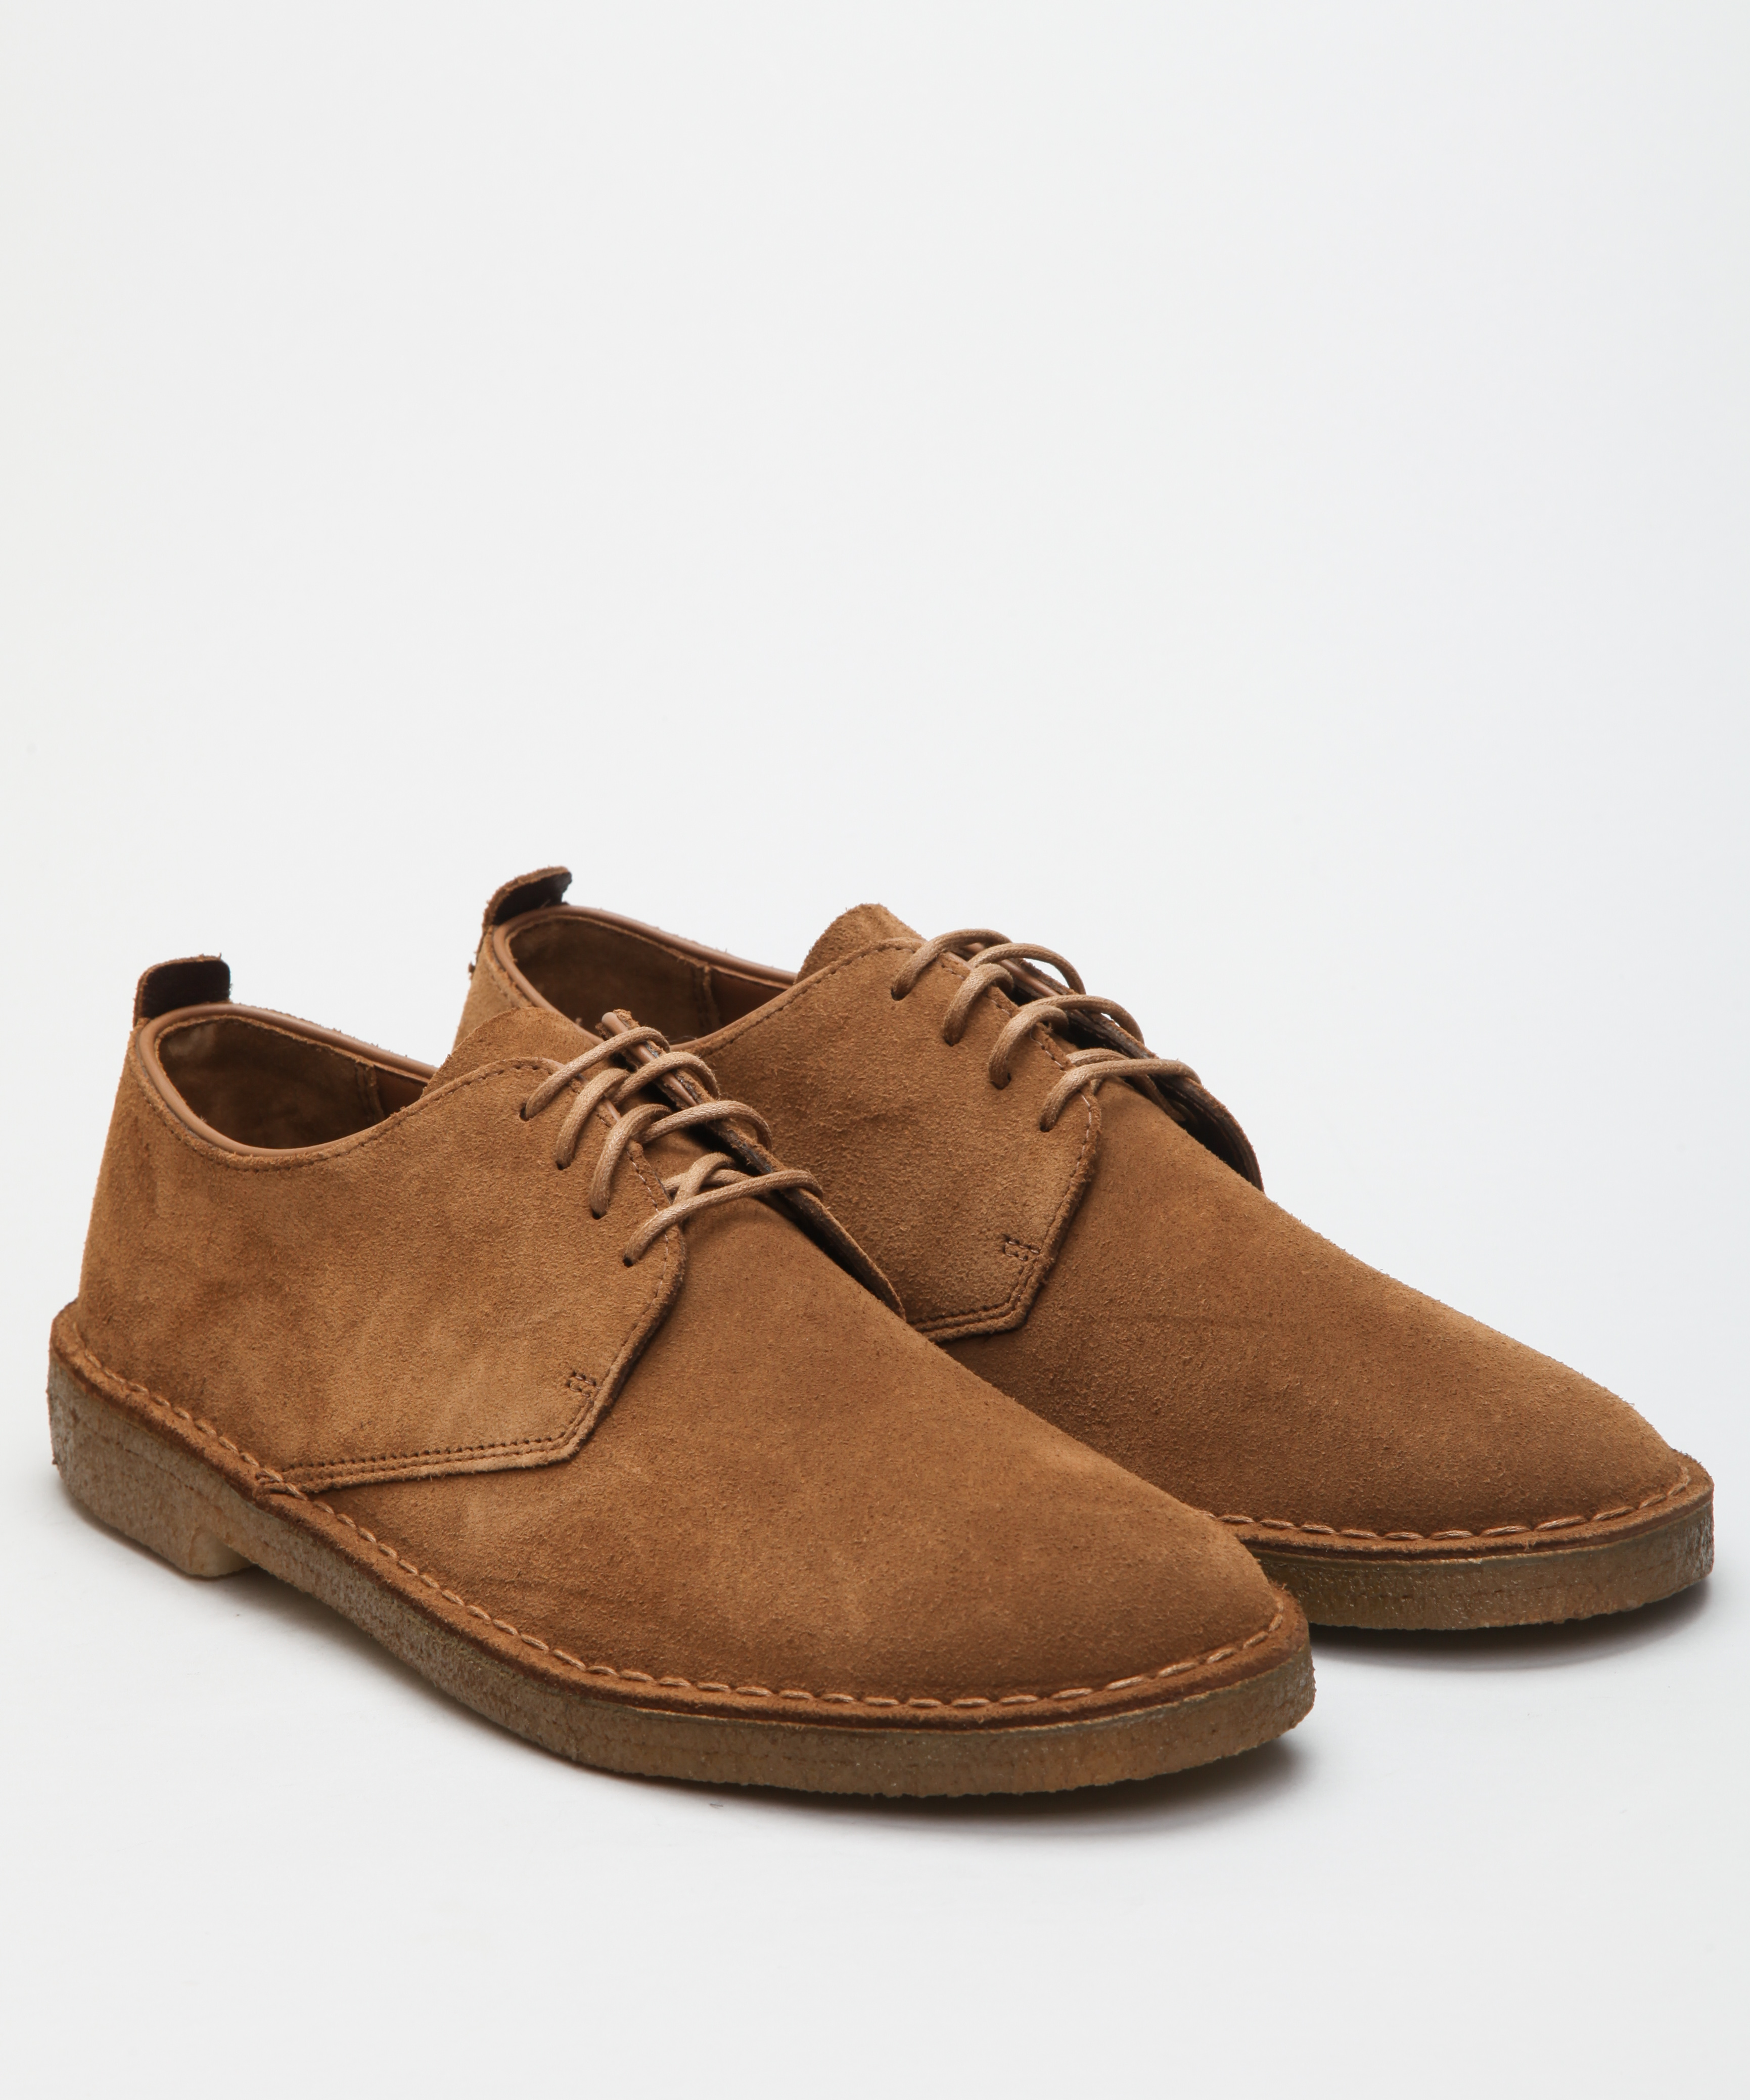 clarks suede shoes